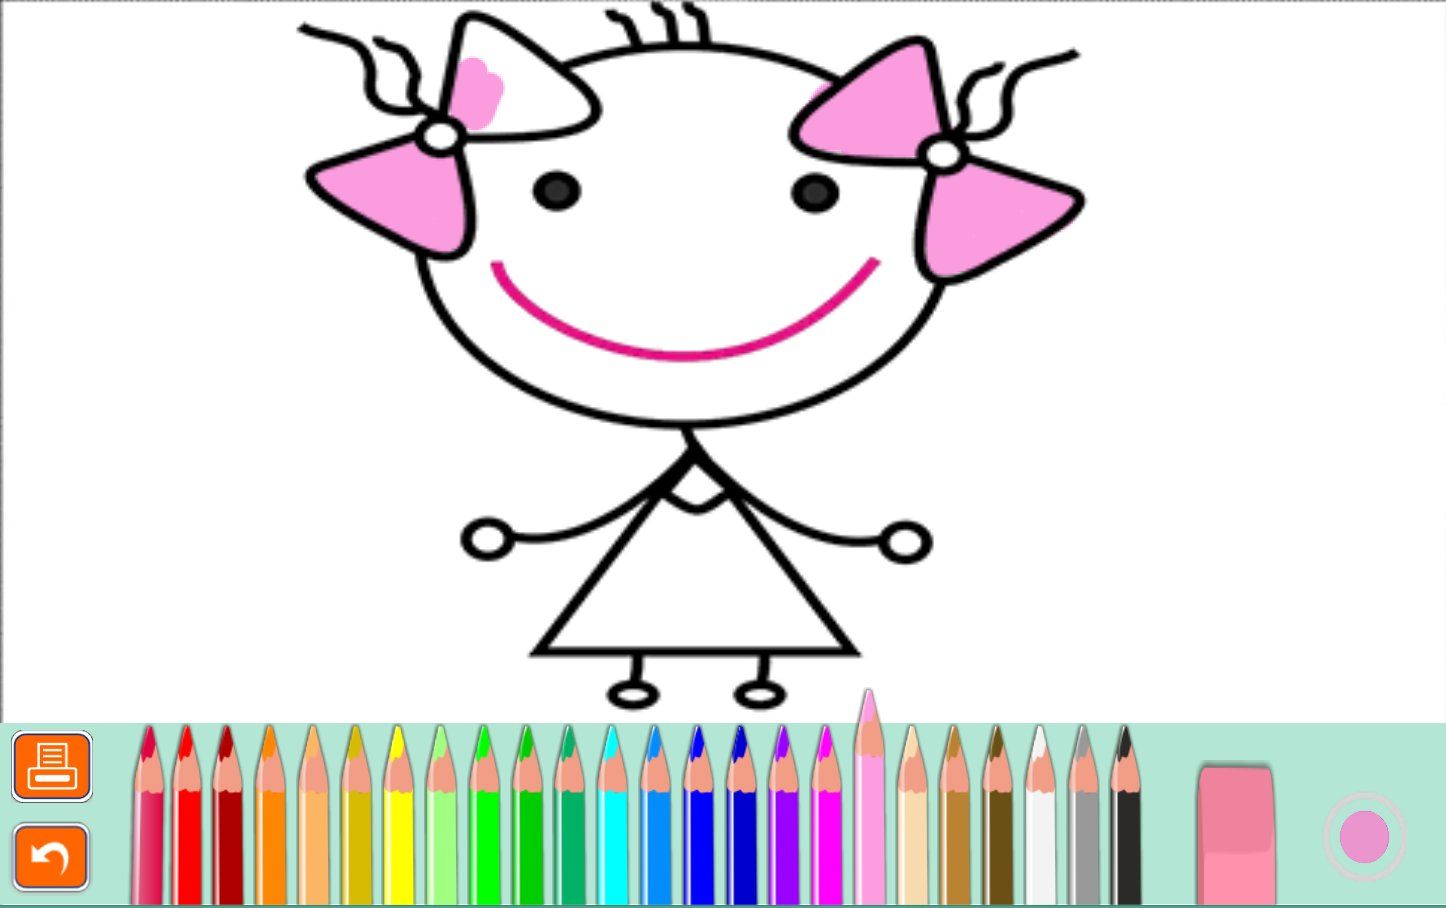 Coloring Book - Unity Source Code by DigiSmile | Codester